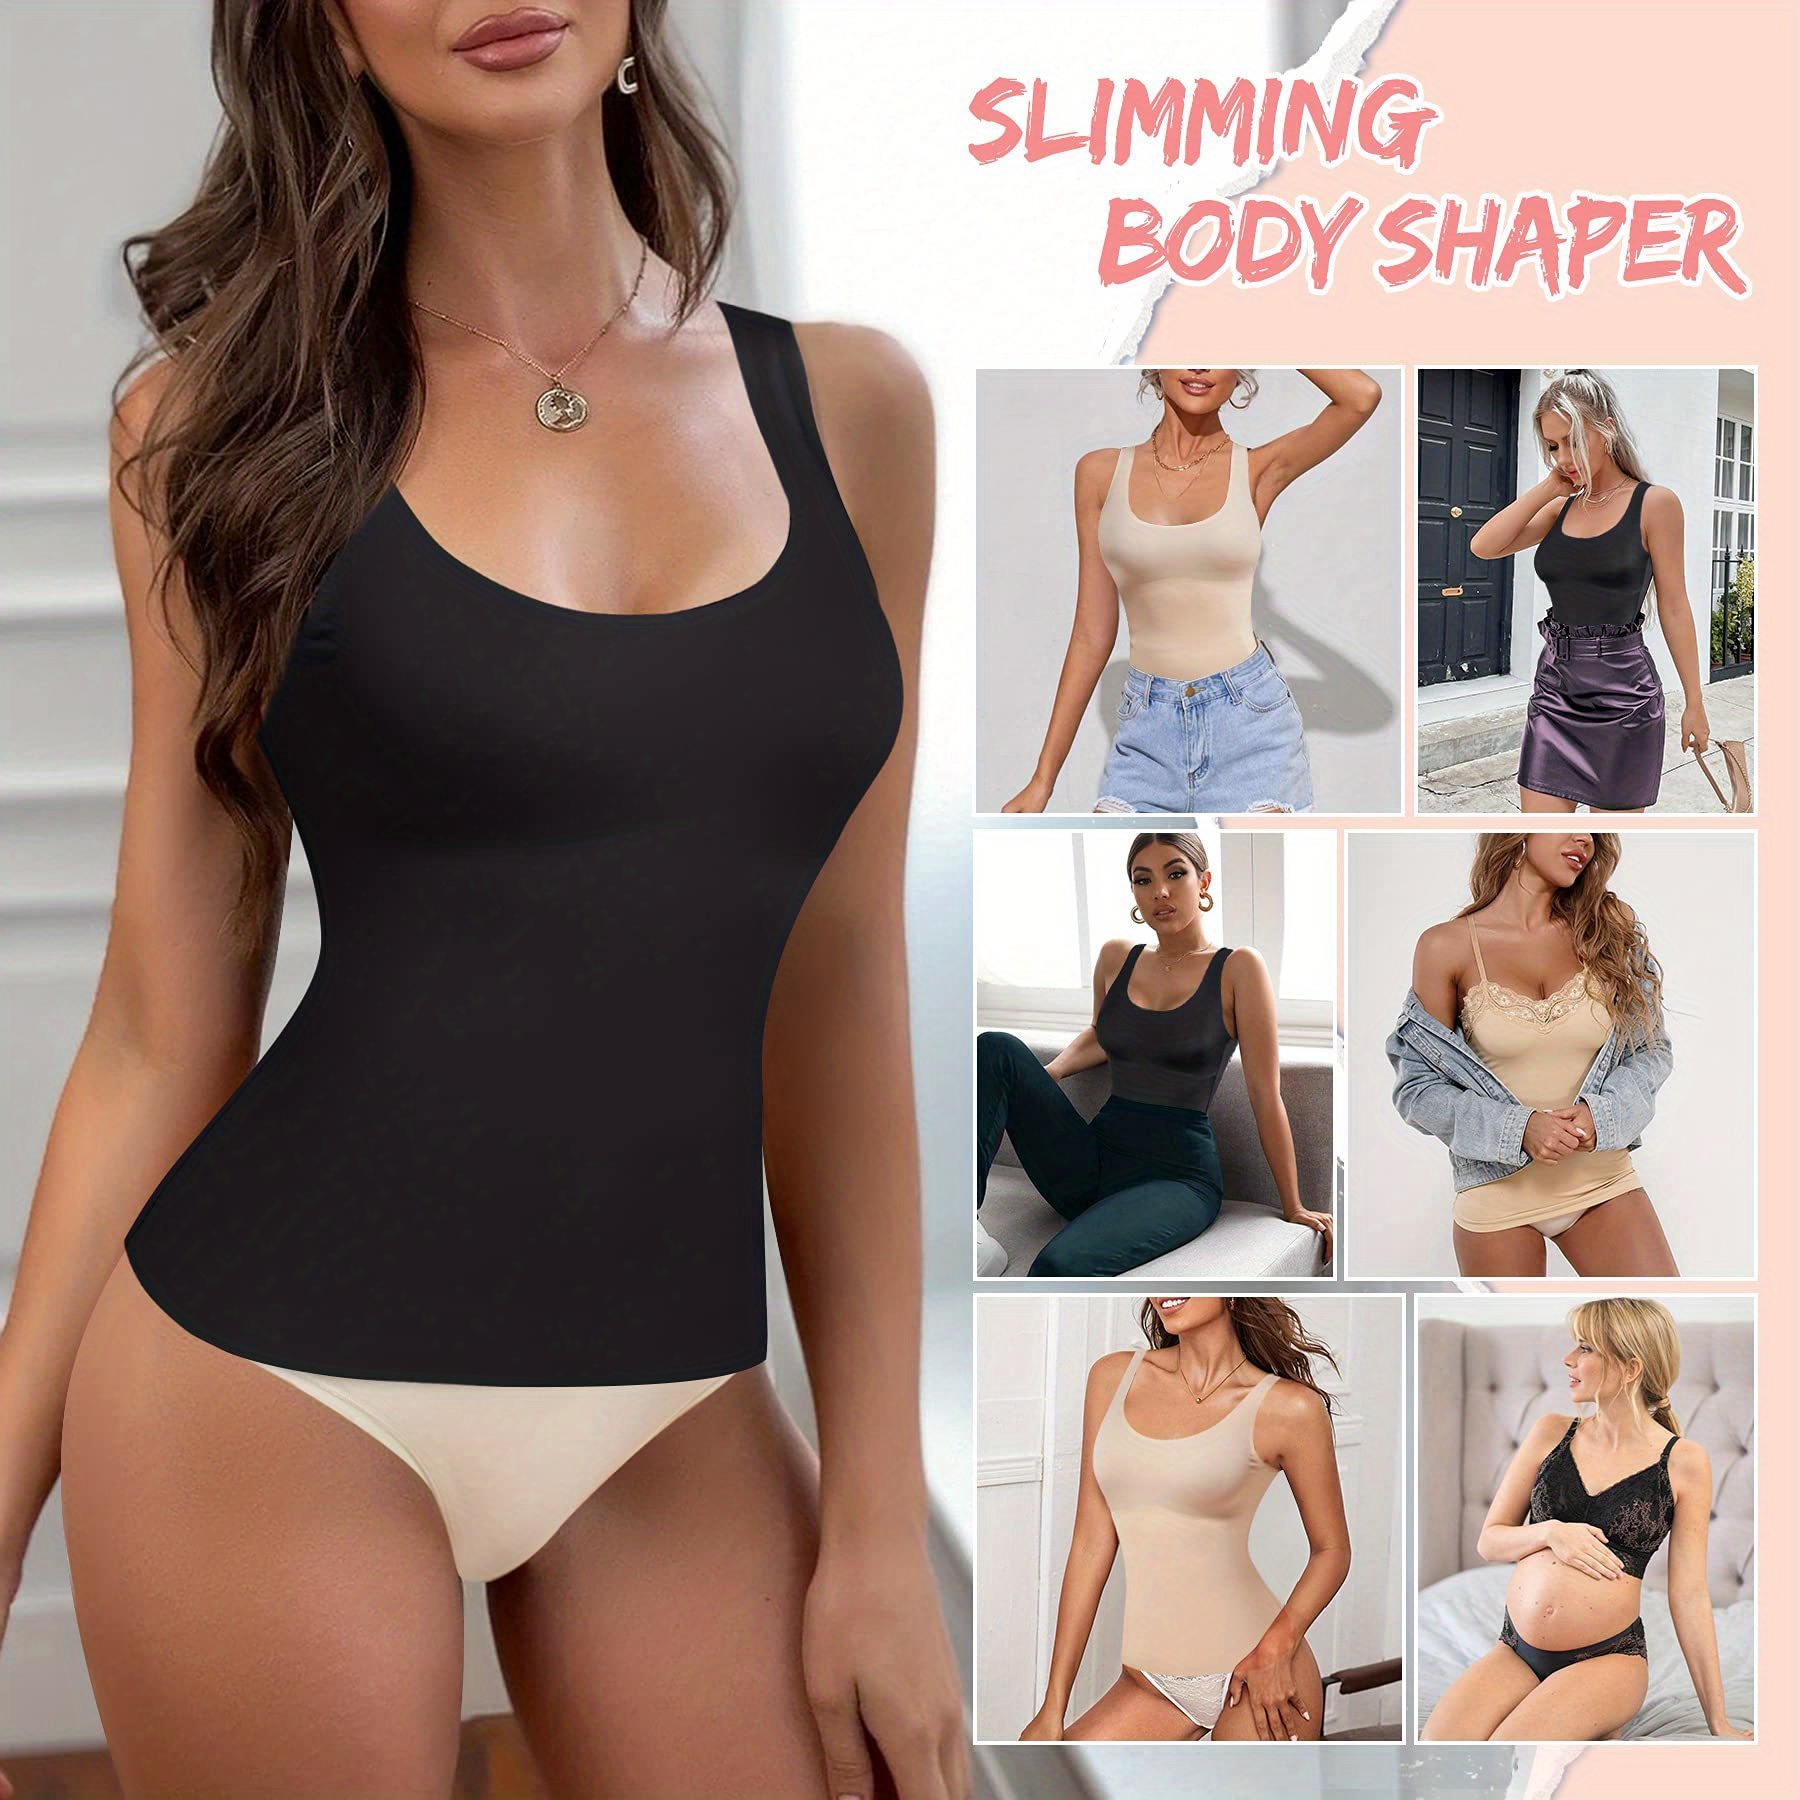 🆕 Kymaro New Body Shaper Compression Top Shapewear for INSTANT SLIMMING